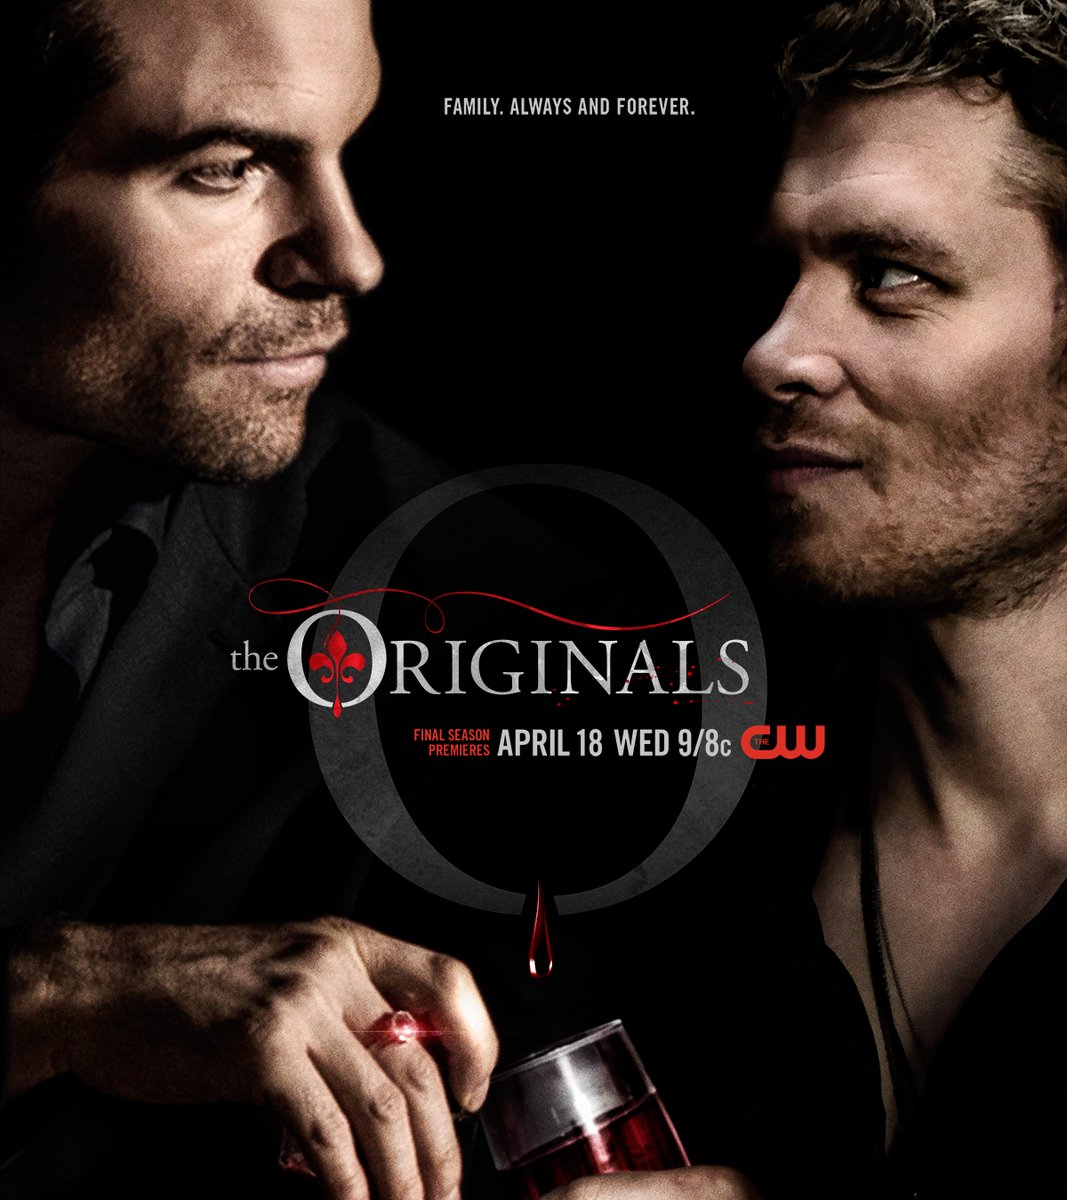 The Originals: 20 Wild Things About Elijah Mikaelson Fans Choose To Ignore